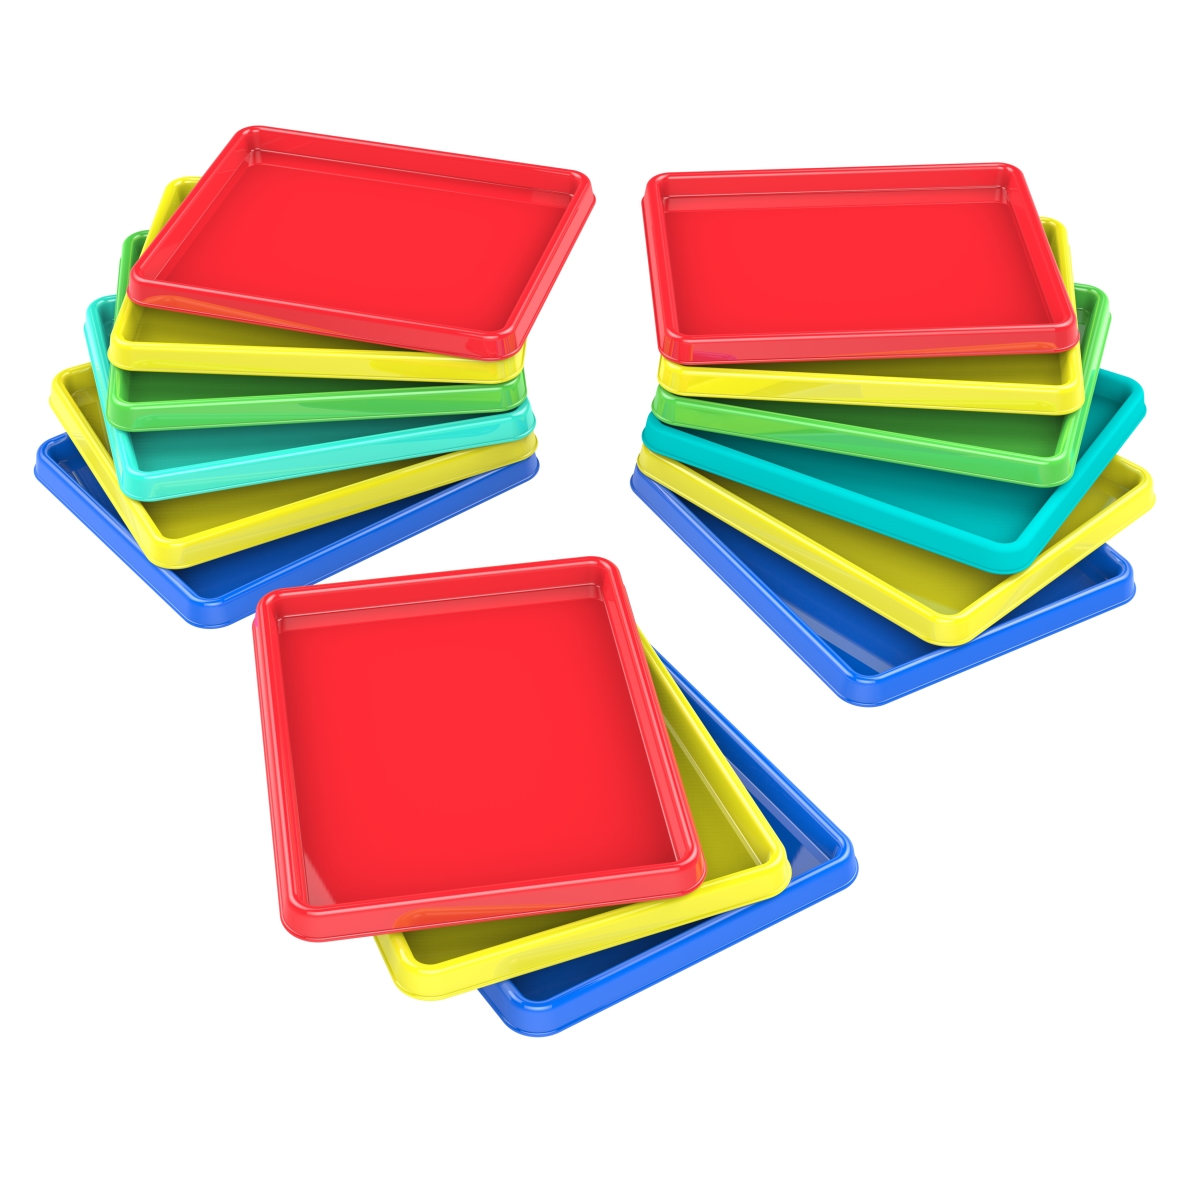 00400e15c 8 X 9.5 In. Sorting & Crafts Tray, Assorted Color - Pack Of 15